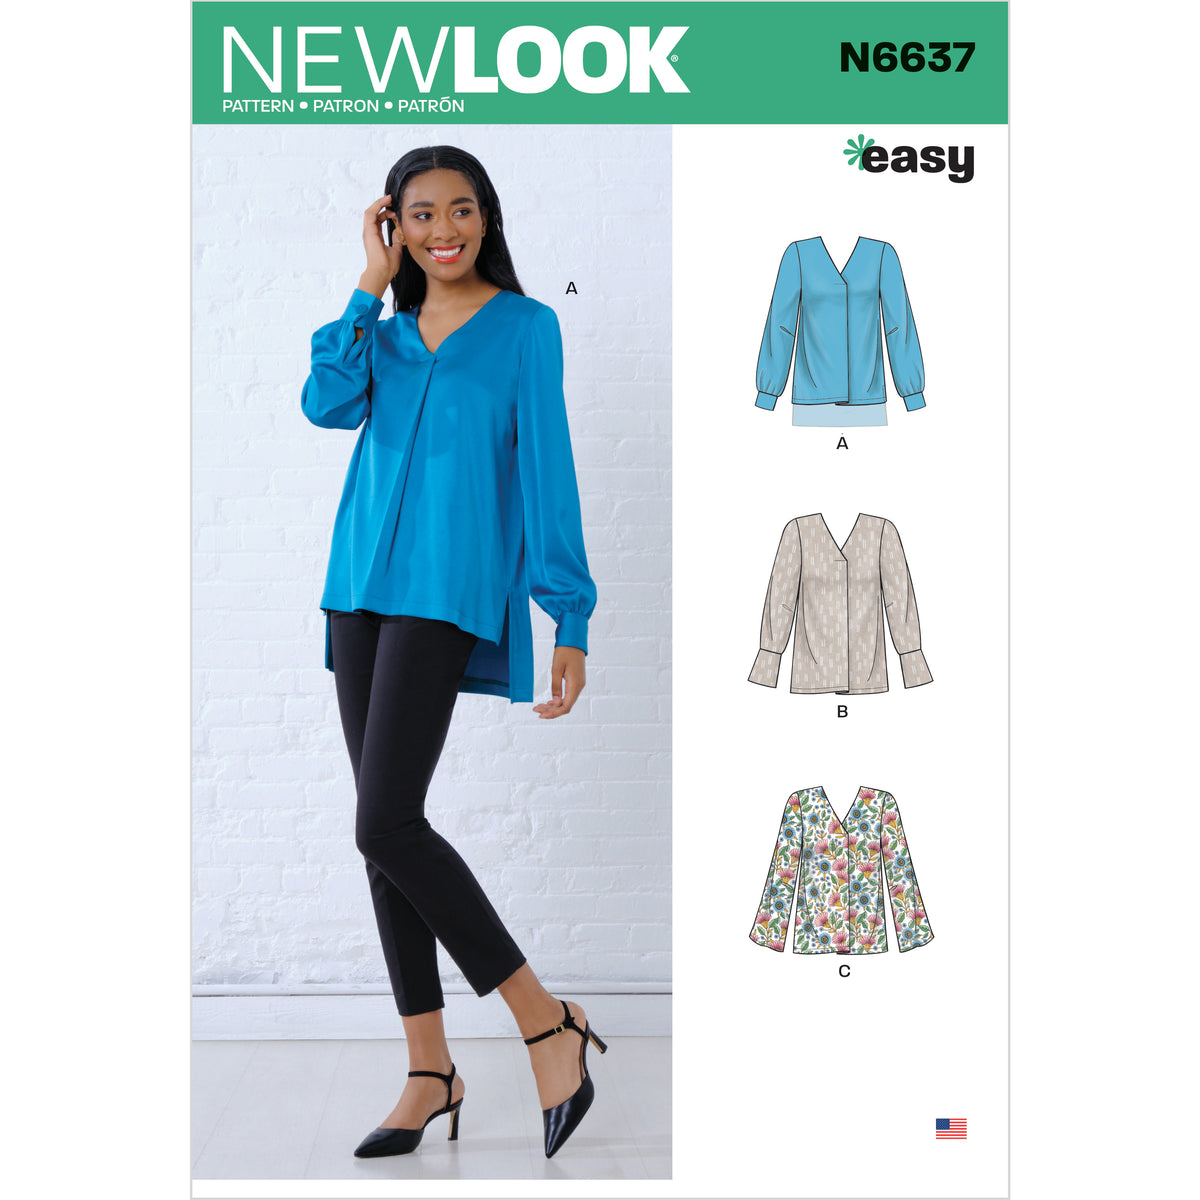 6637 New Look Sewing Pattern N6637 Misses' Loose Fitting Blouses